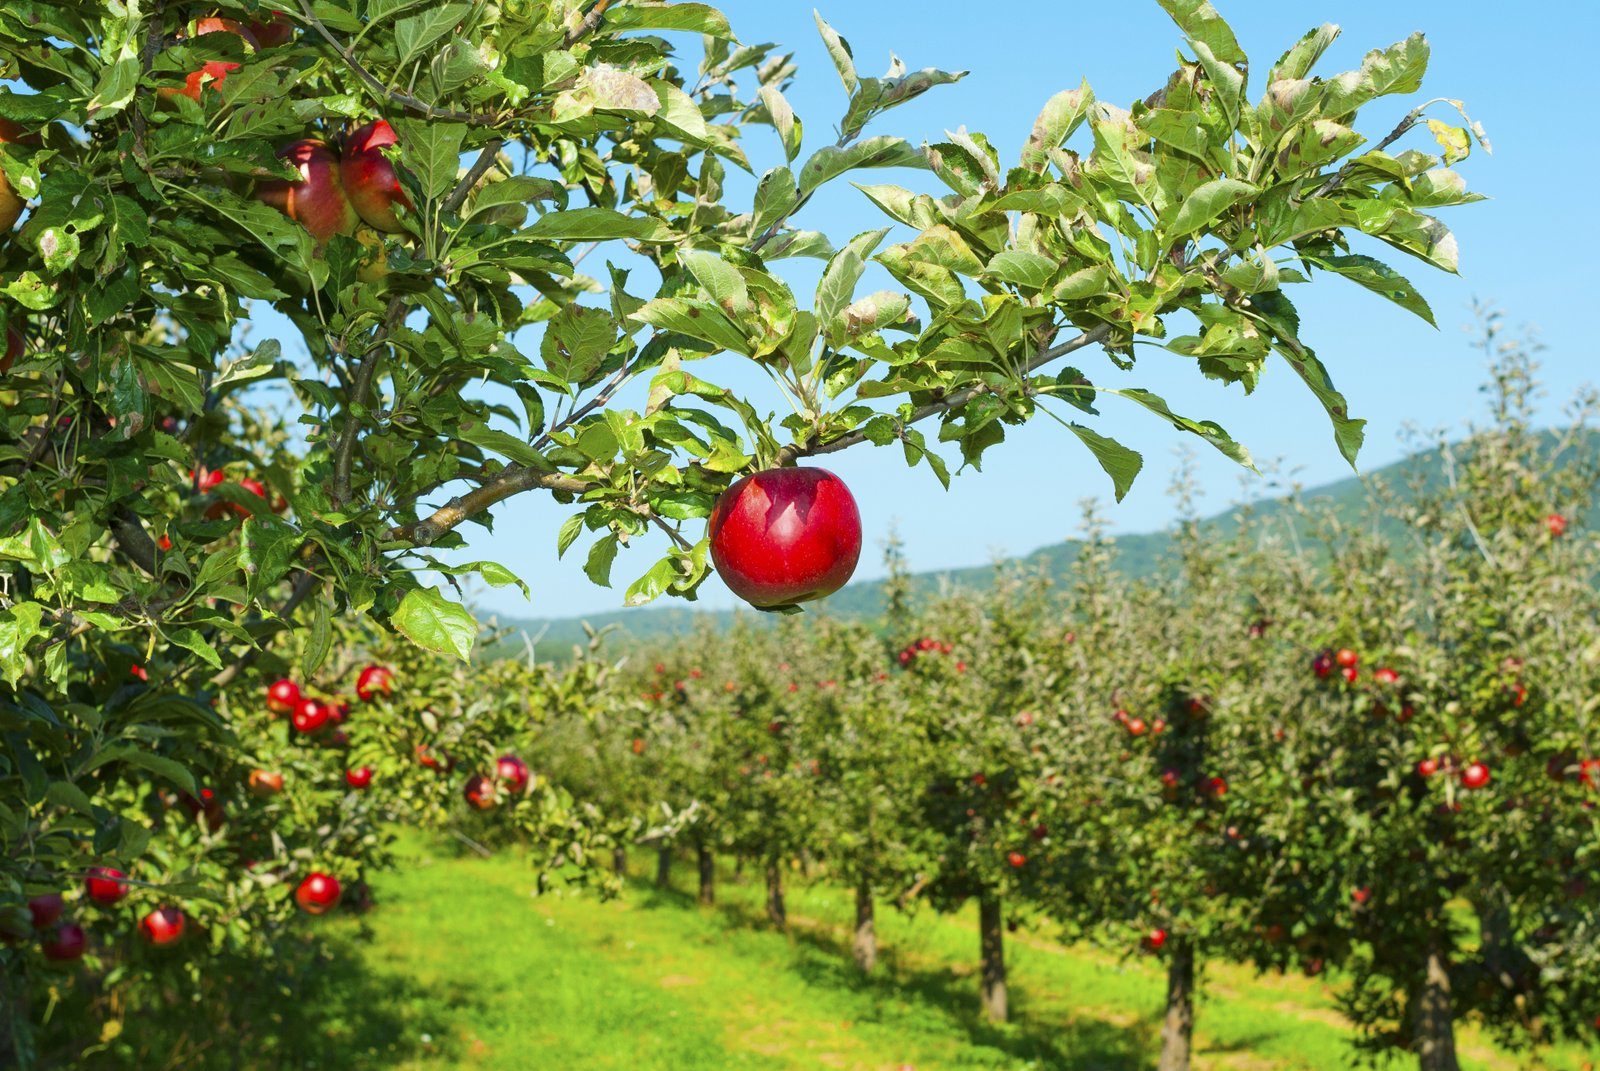 Apples are the second most-valuable fruit grown in the United States.